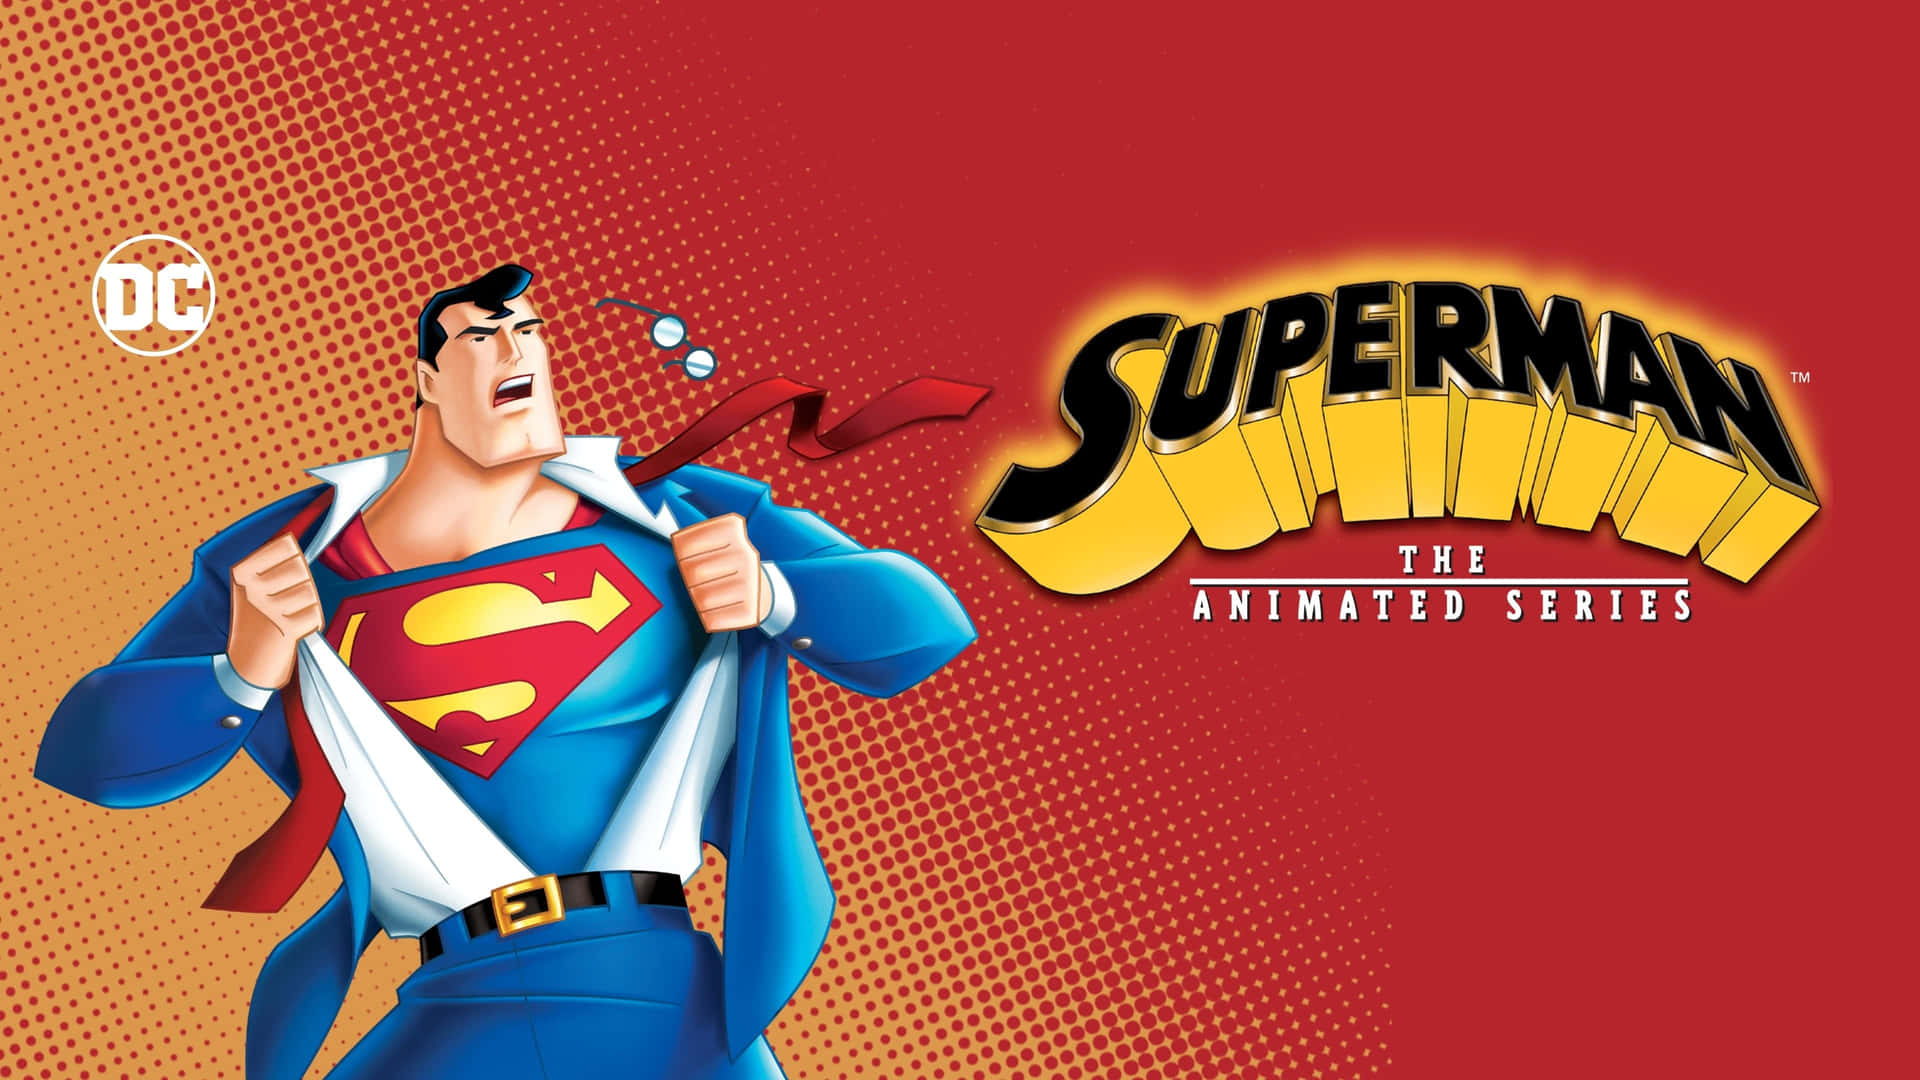 Superman flying above Metropolis in Superman: The Animated Series Wallpaper